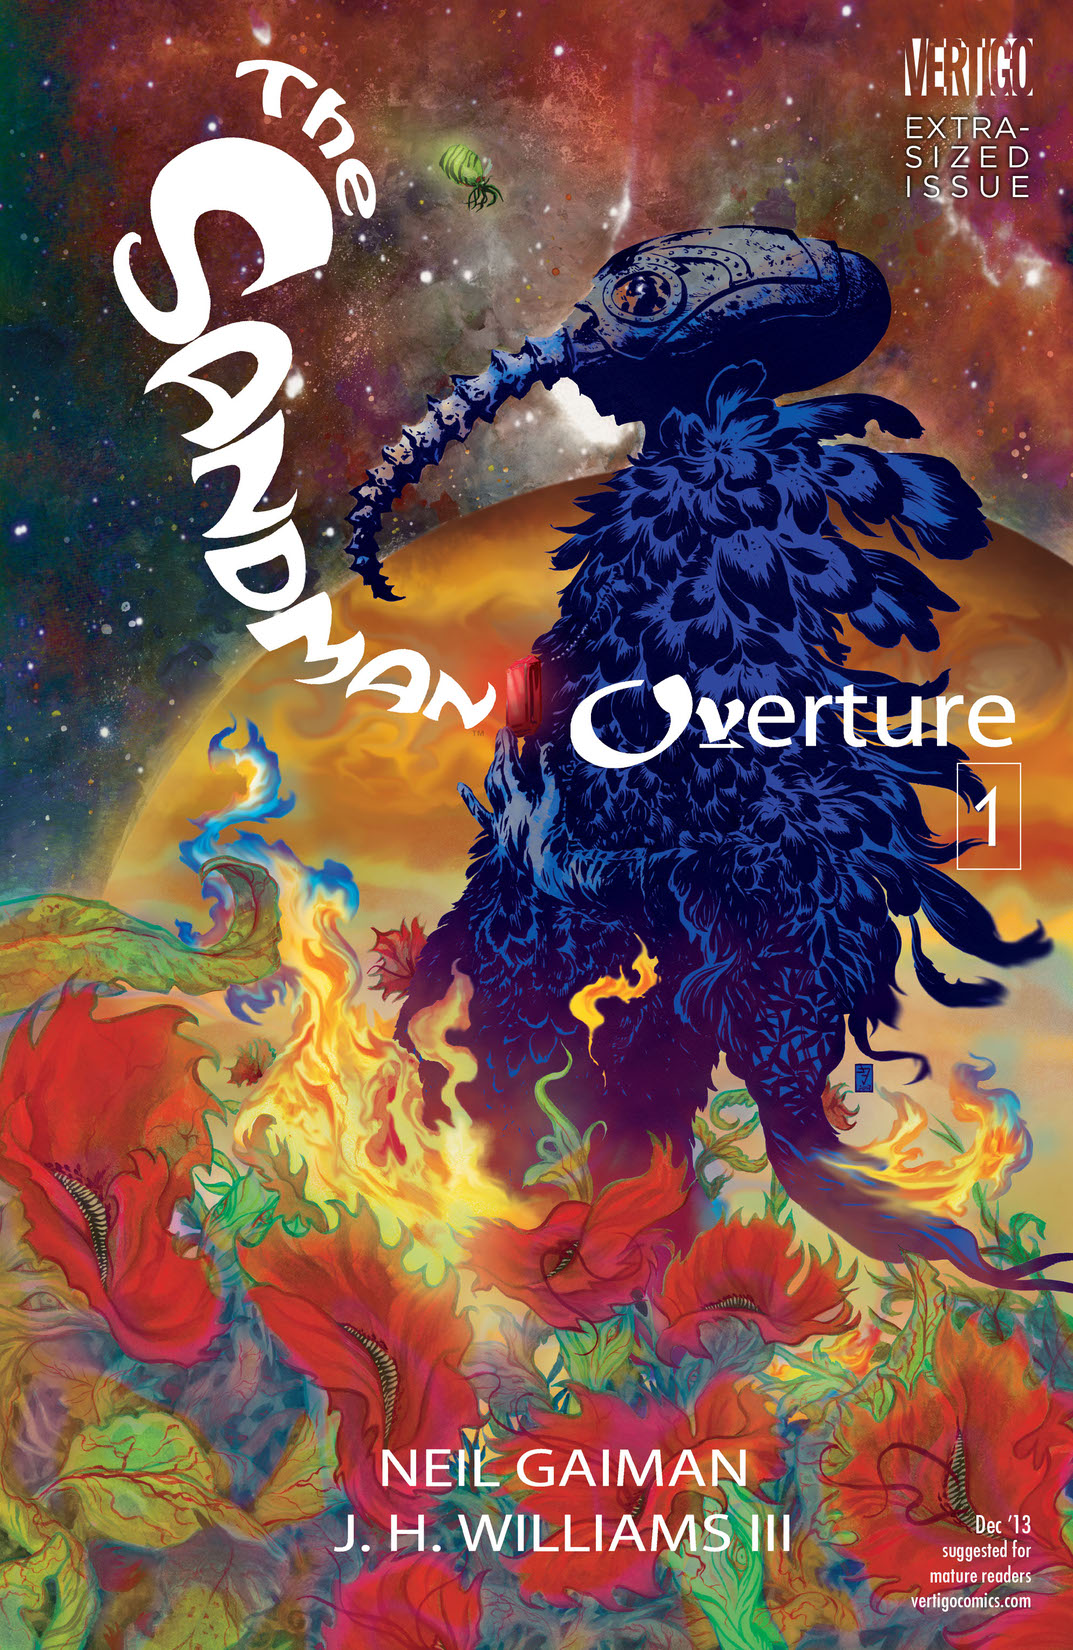 The Sandman: Overture #1 preview images